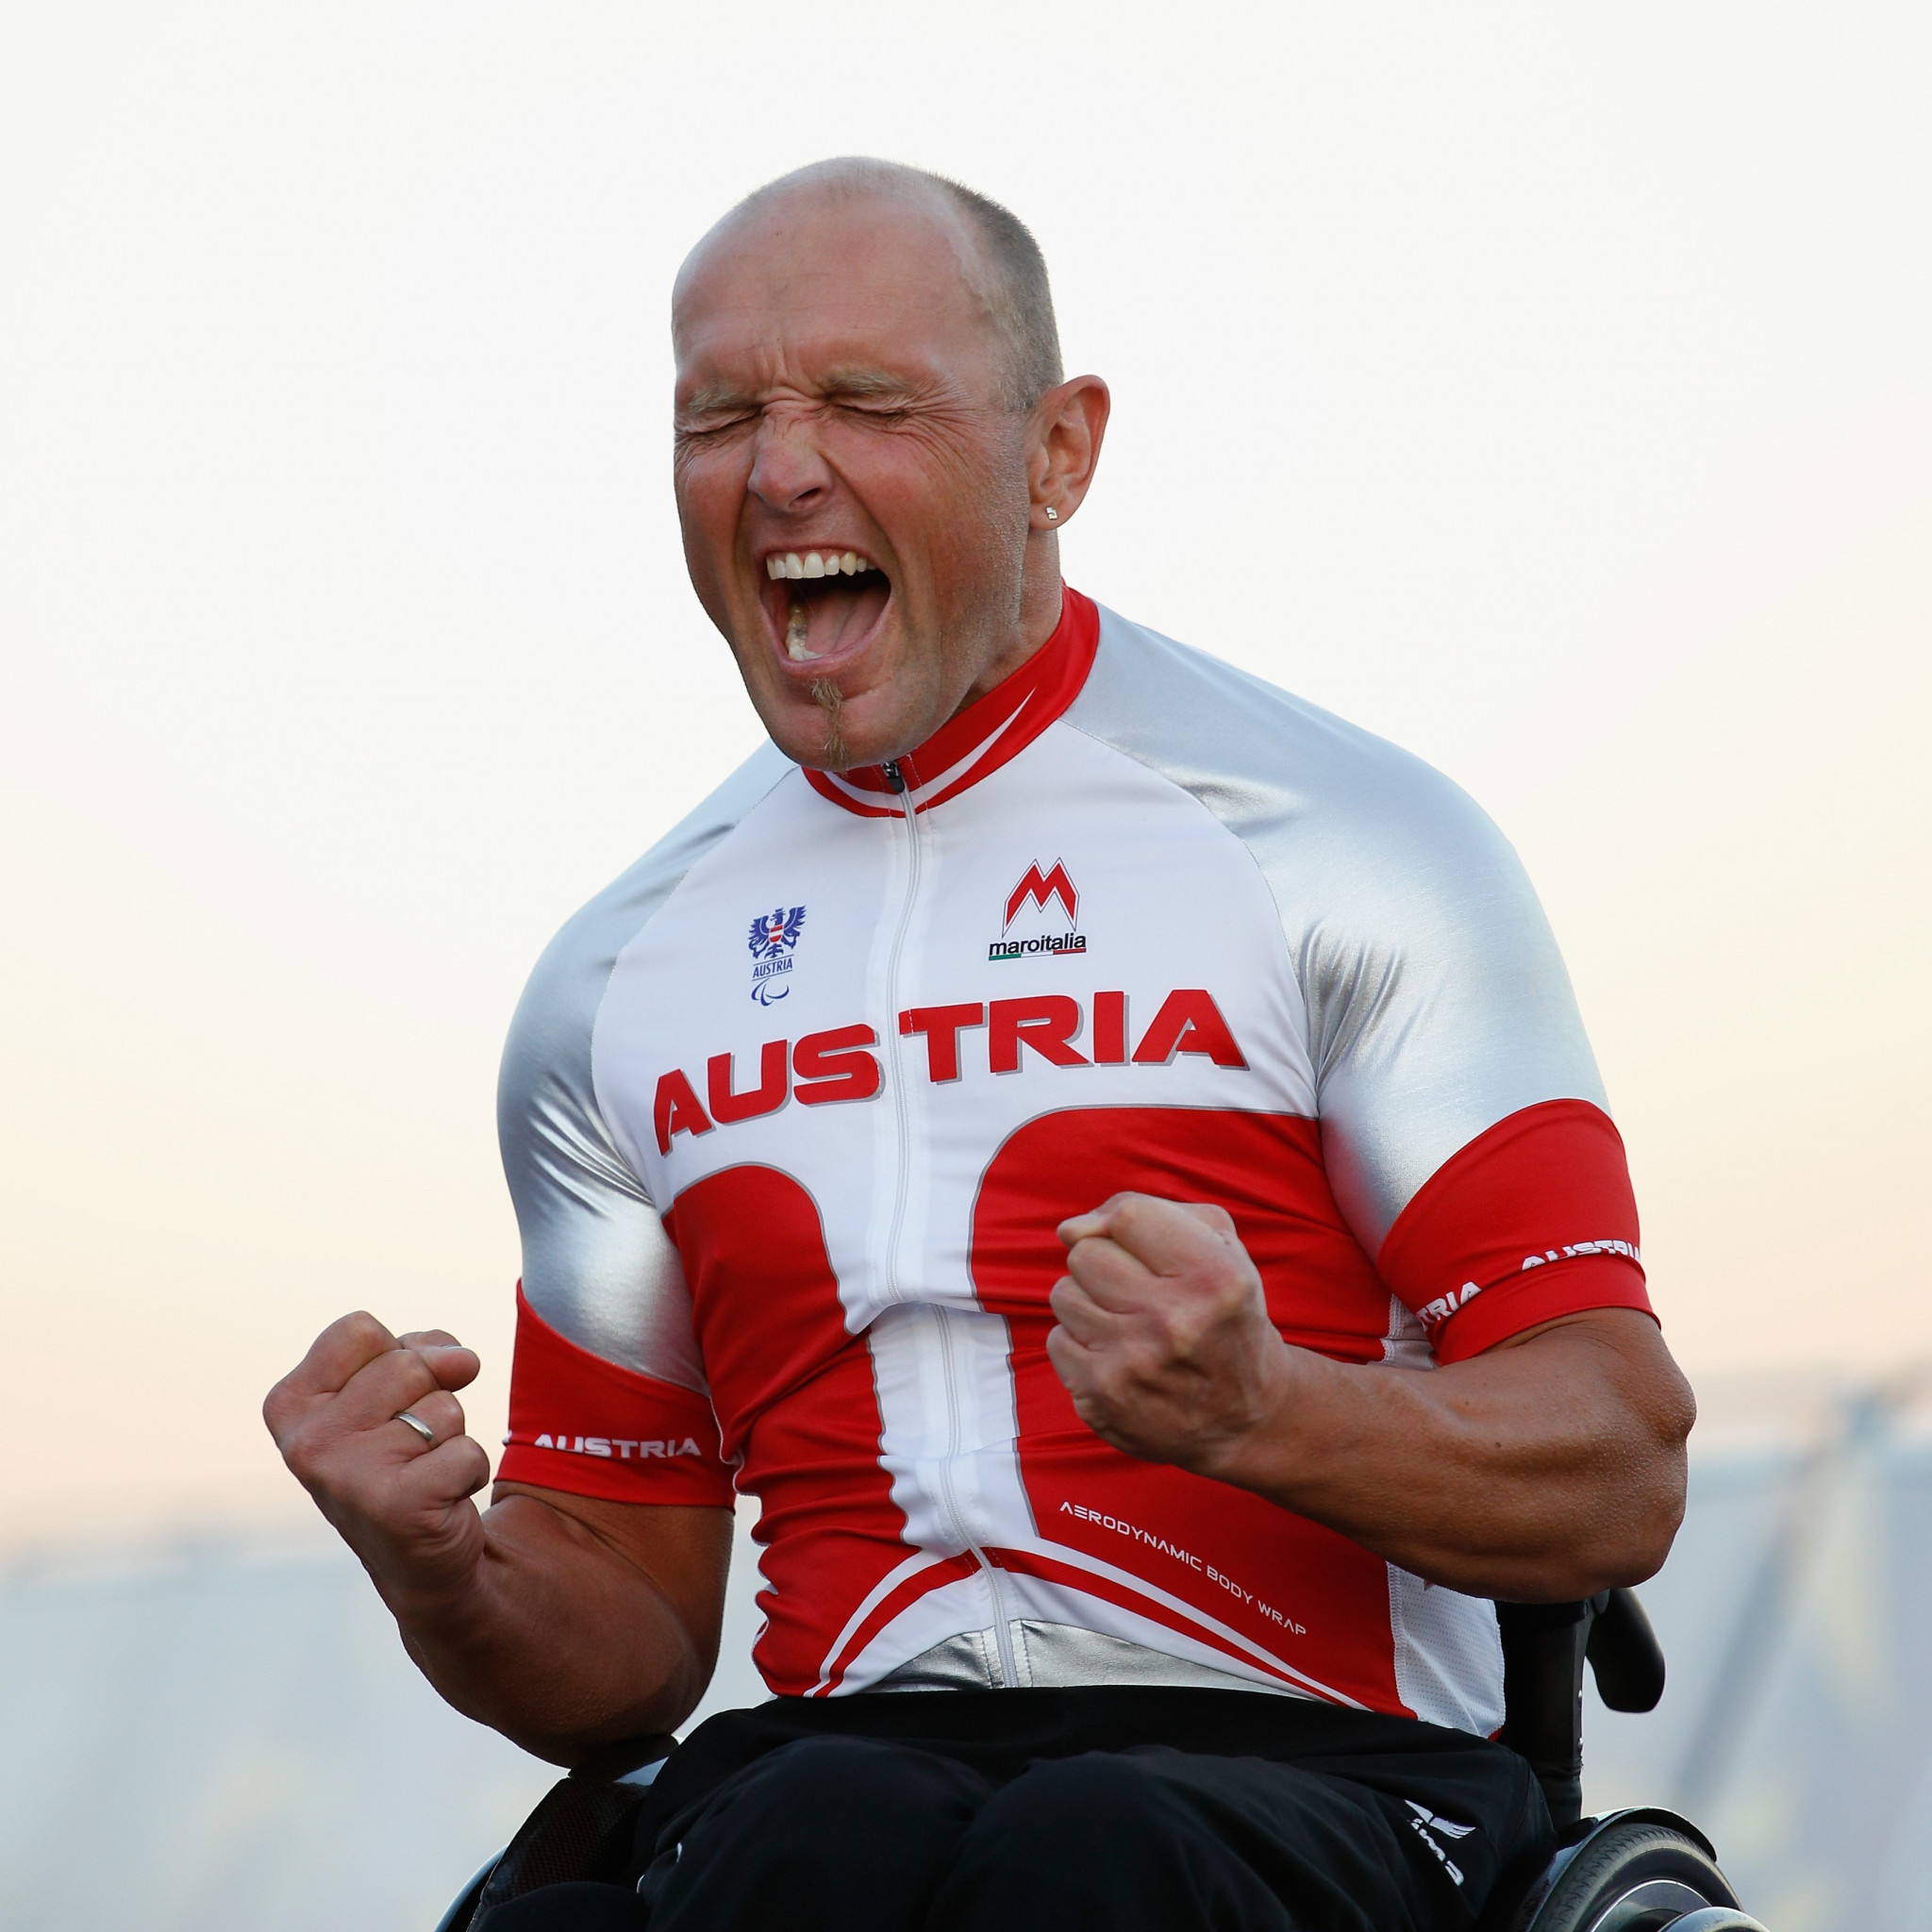 Three-time Paralympic medallist Ablinger yet to make decision on post-Tokyo 2020 plans